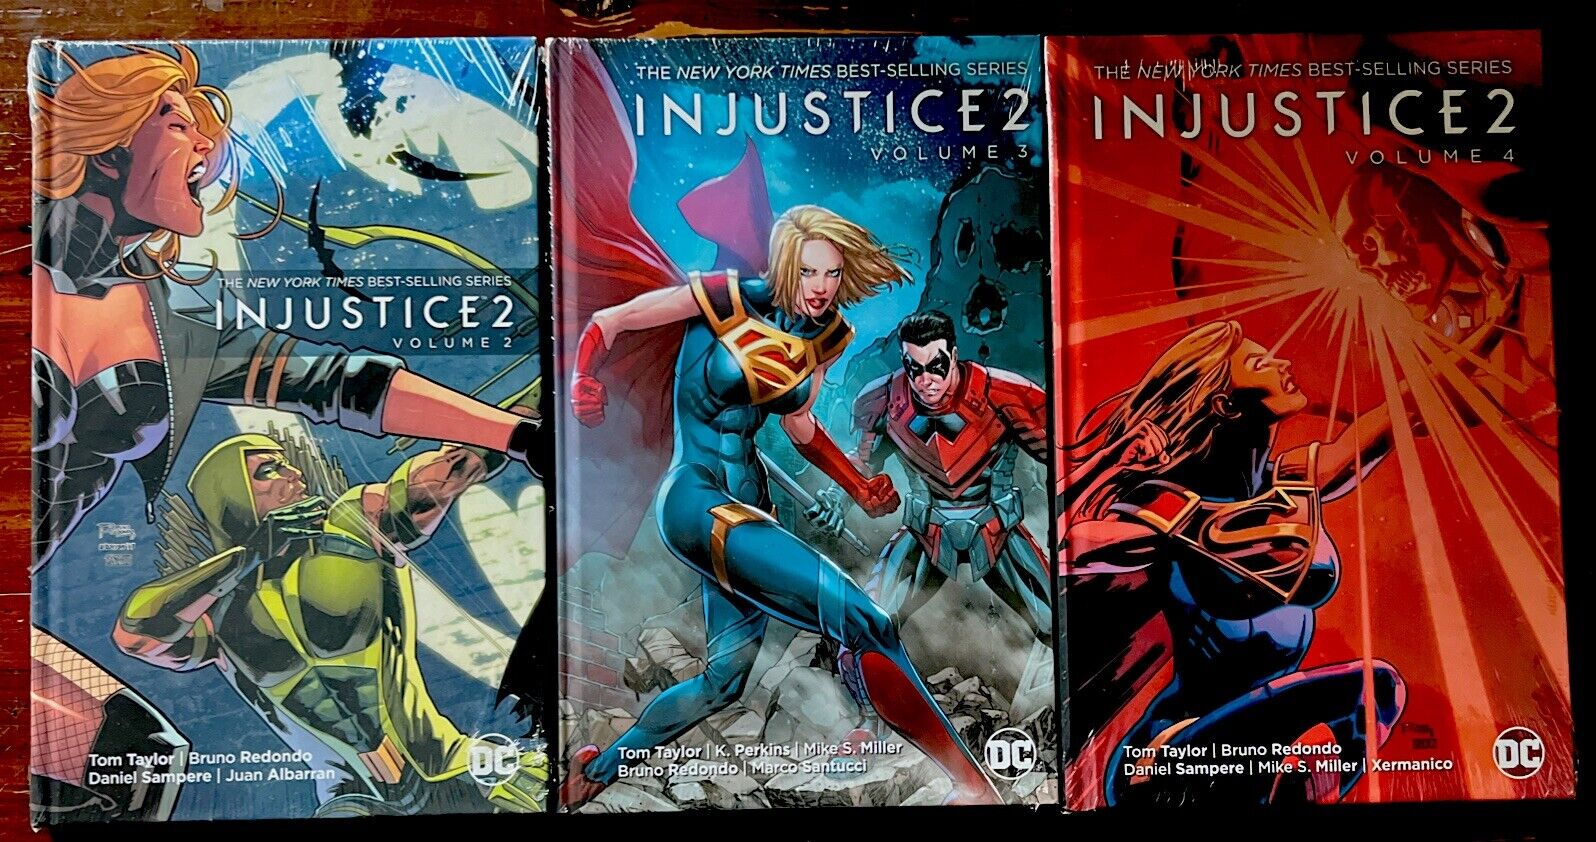 Injustice 2 - Vol 2, 3, and 4 (OOP) Complete Series - TPB - Brand New